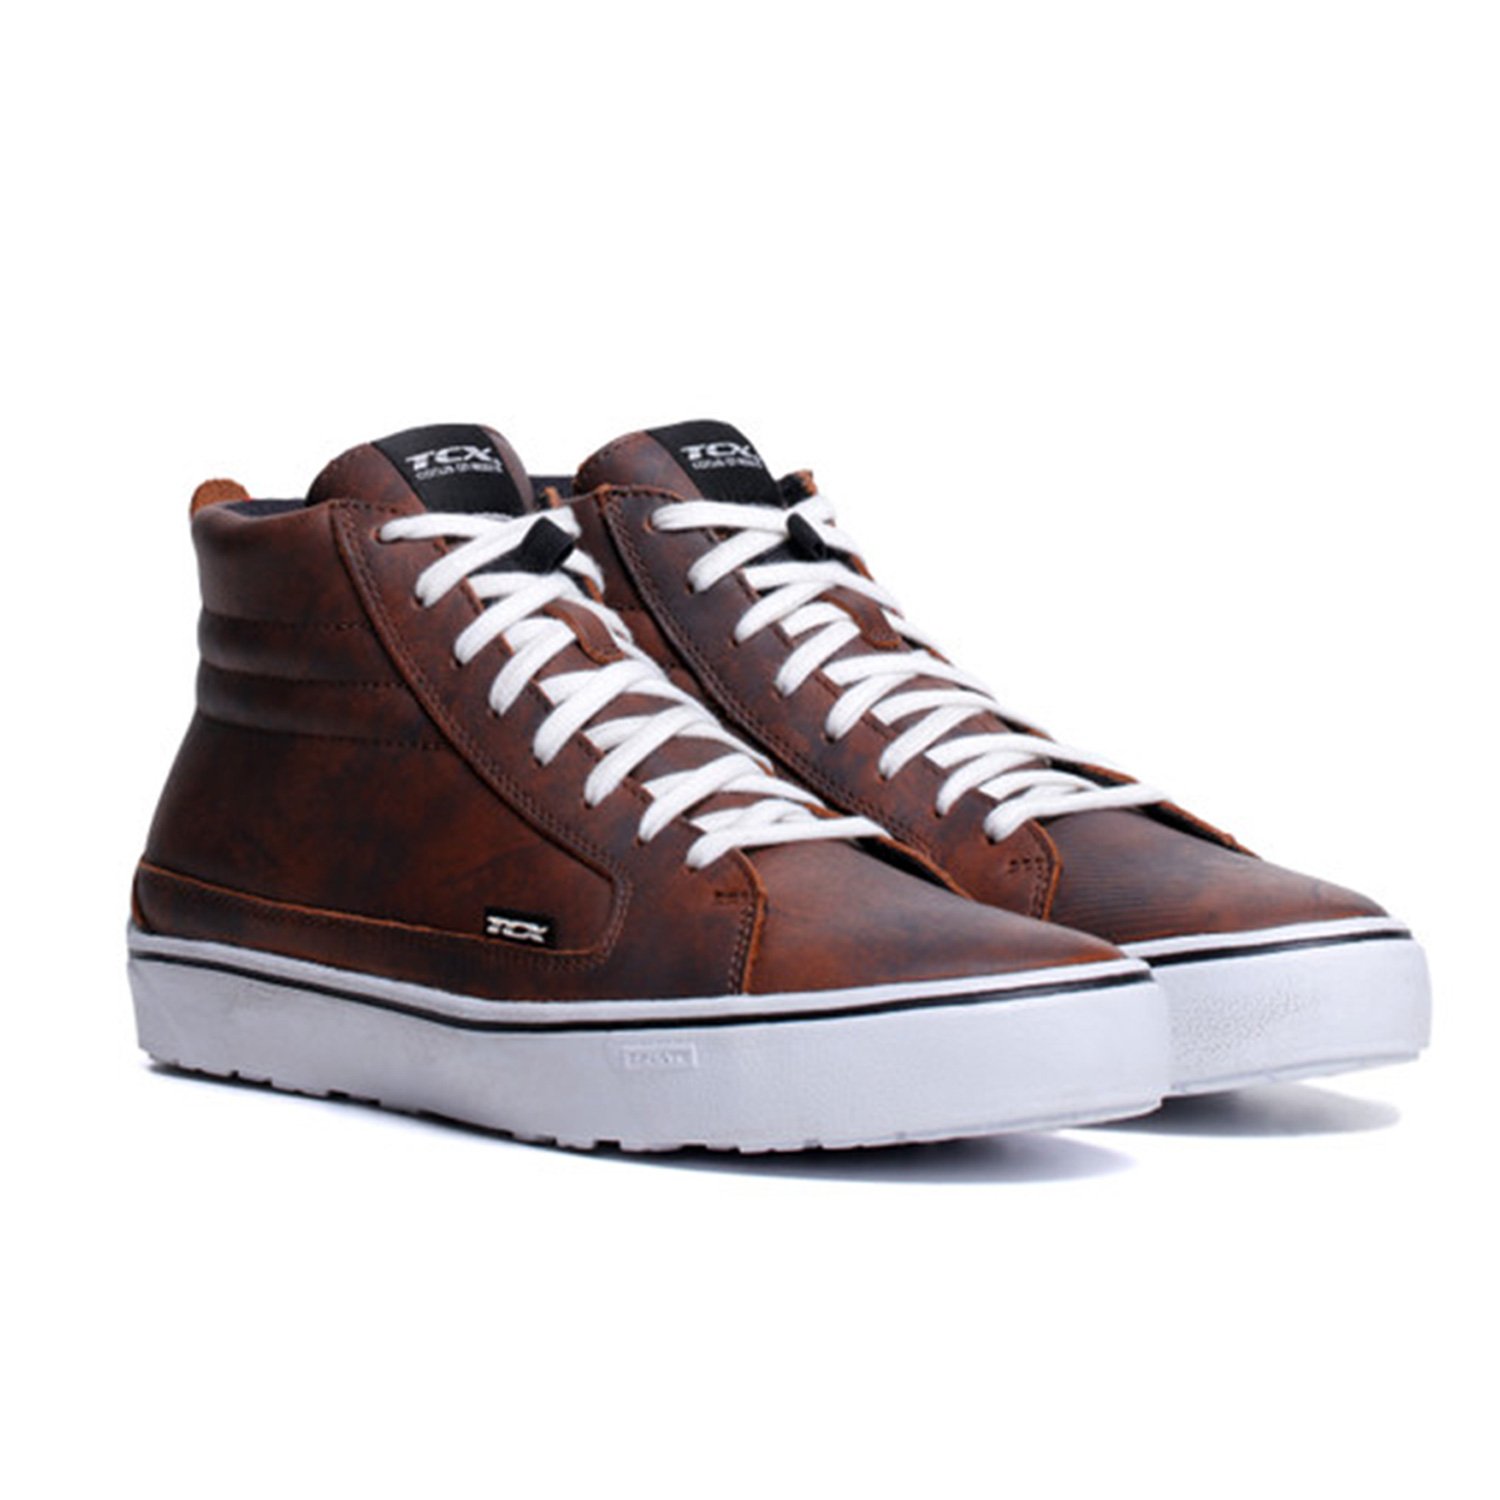 Image of TCX Street 3 WP Marron Blanc Chaussures Taille 45